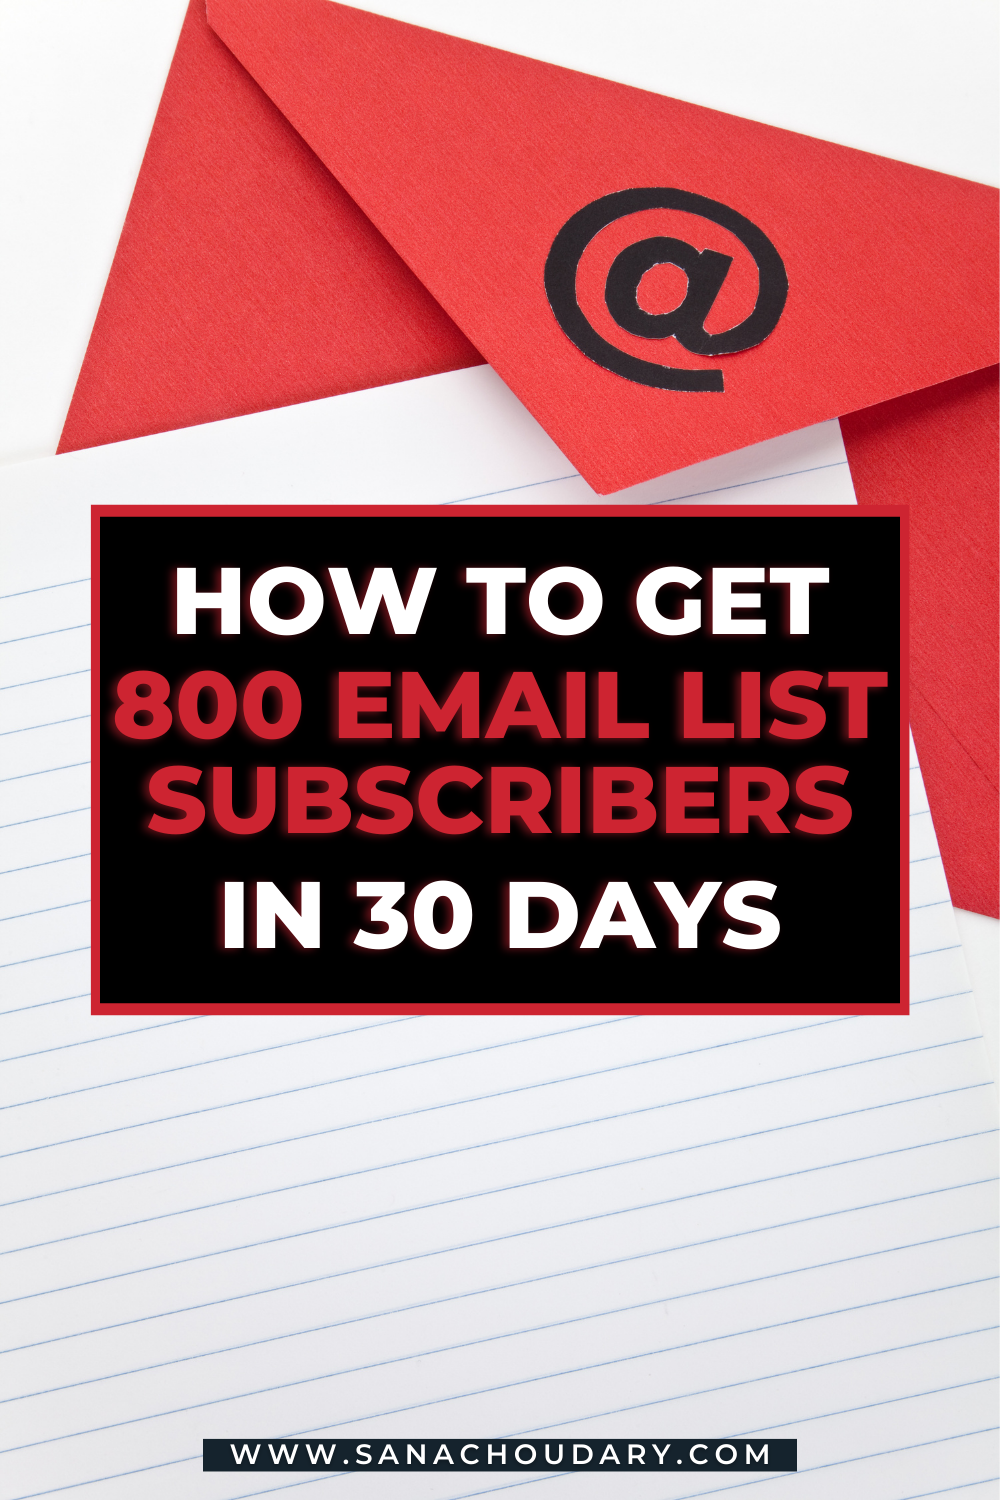 How to Get 800 Email List Subscribers in 30 days